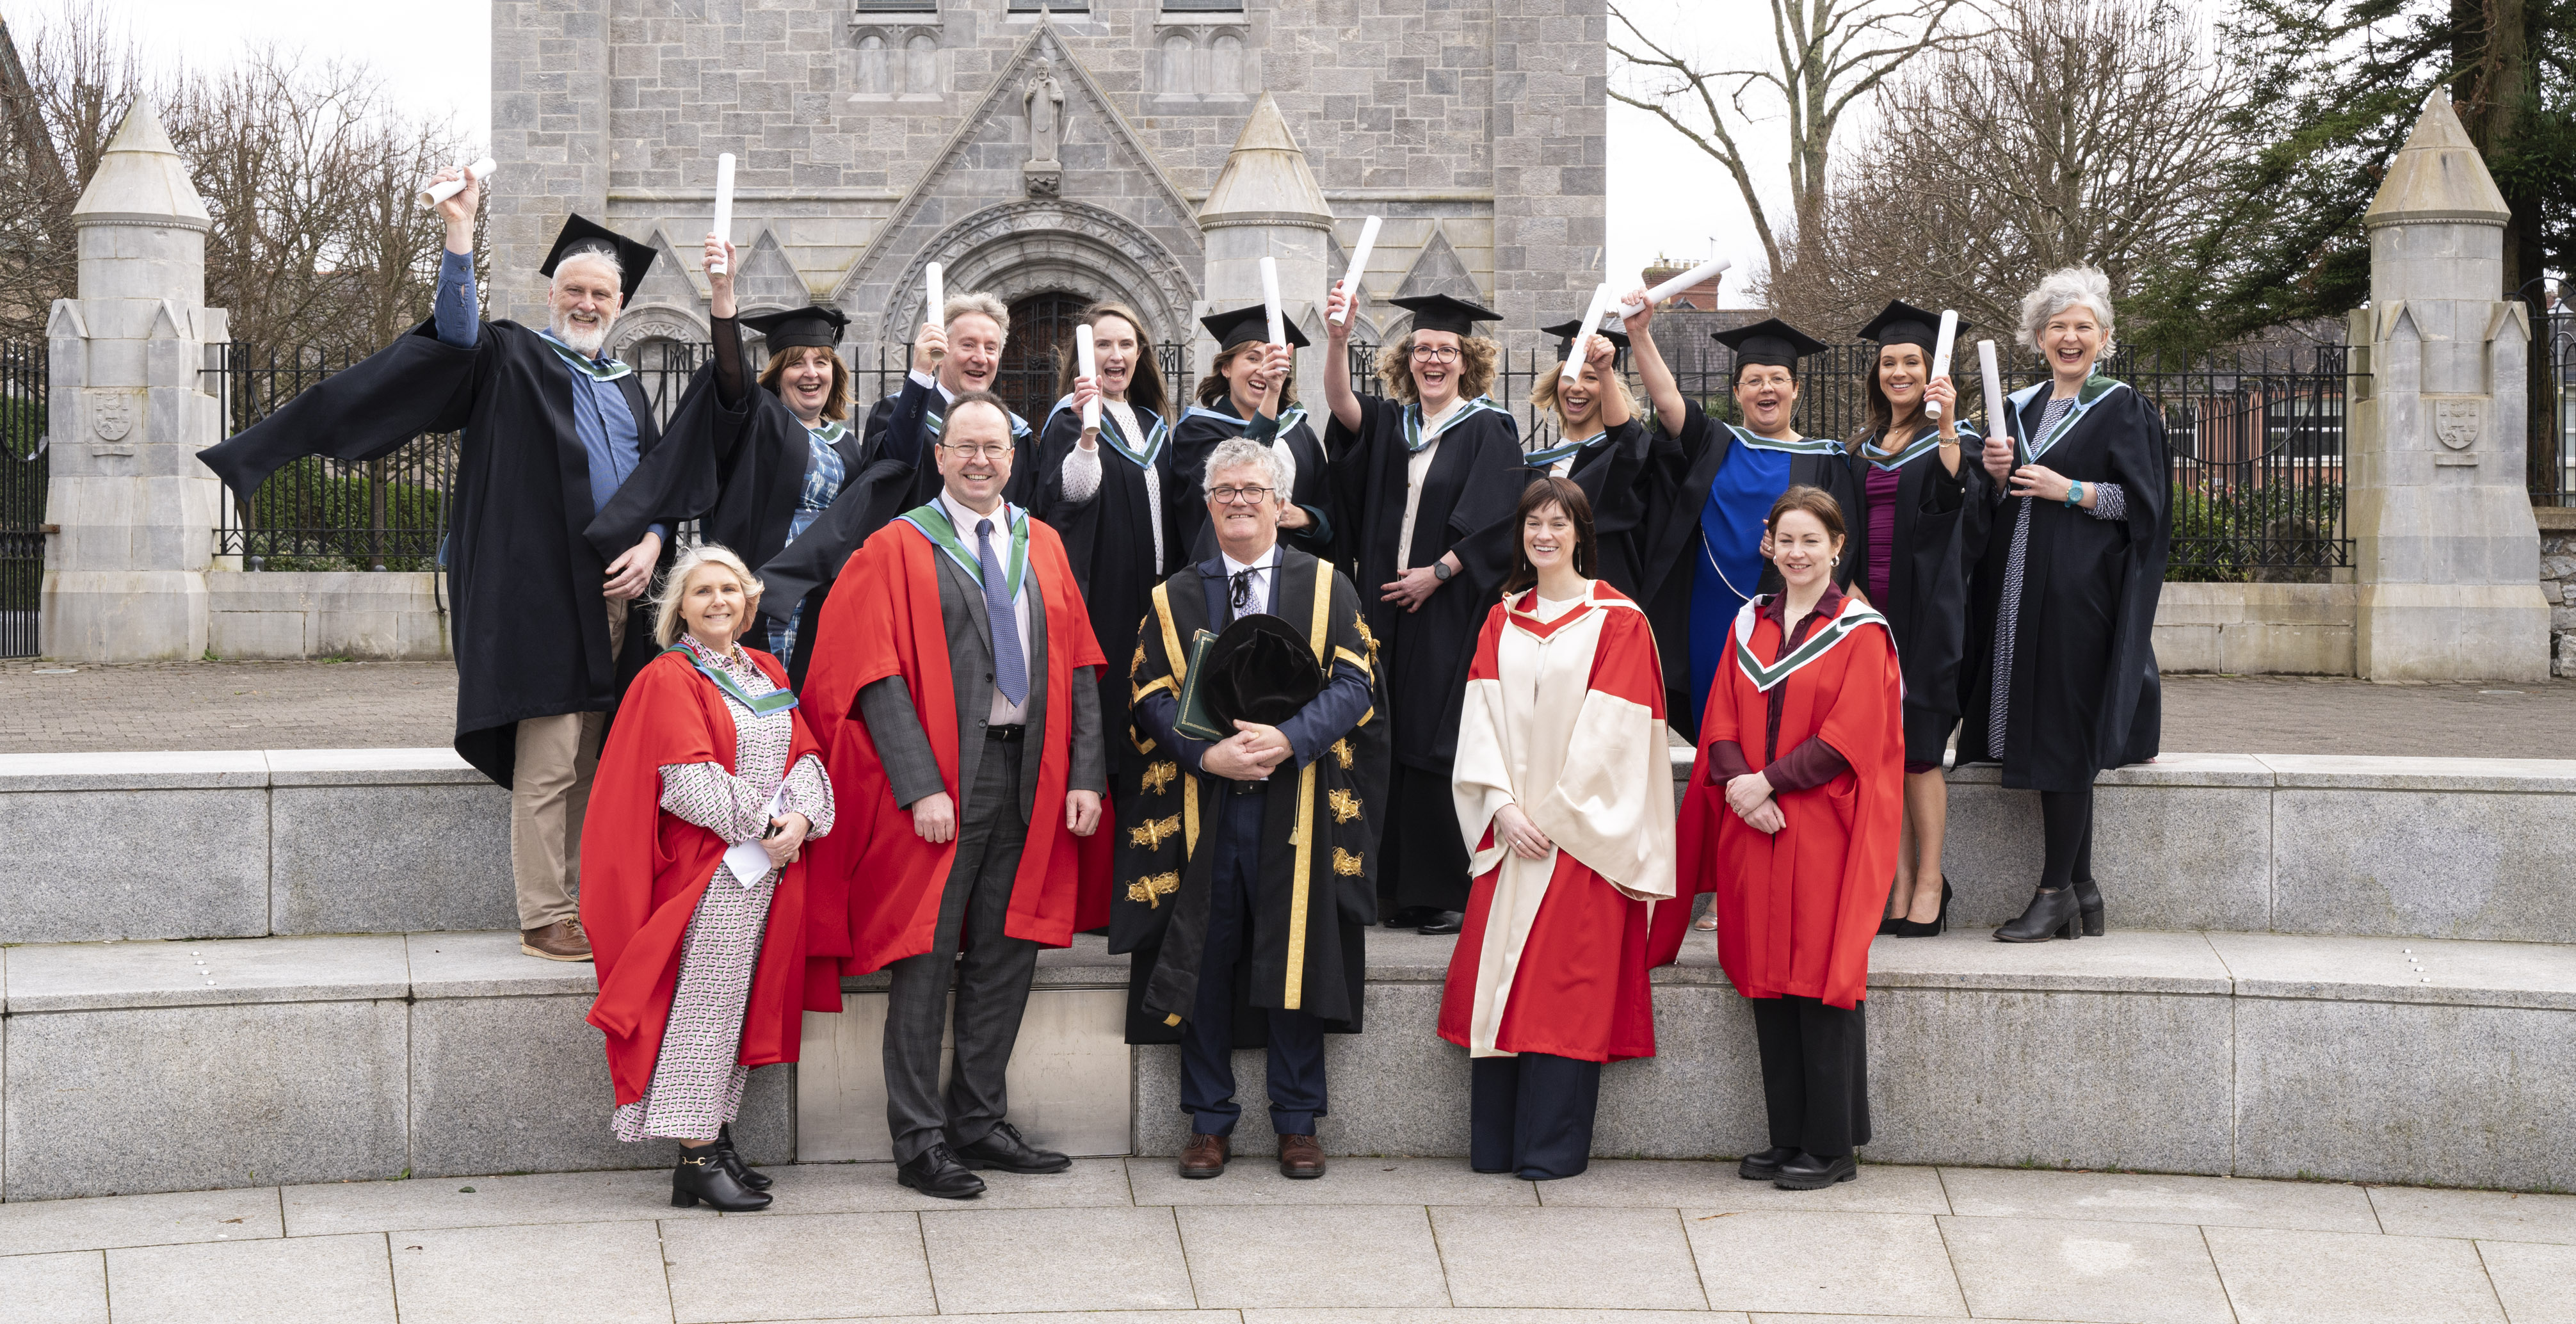 Graduation Day for first cohort of MSc Sustainability in Enterprise students